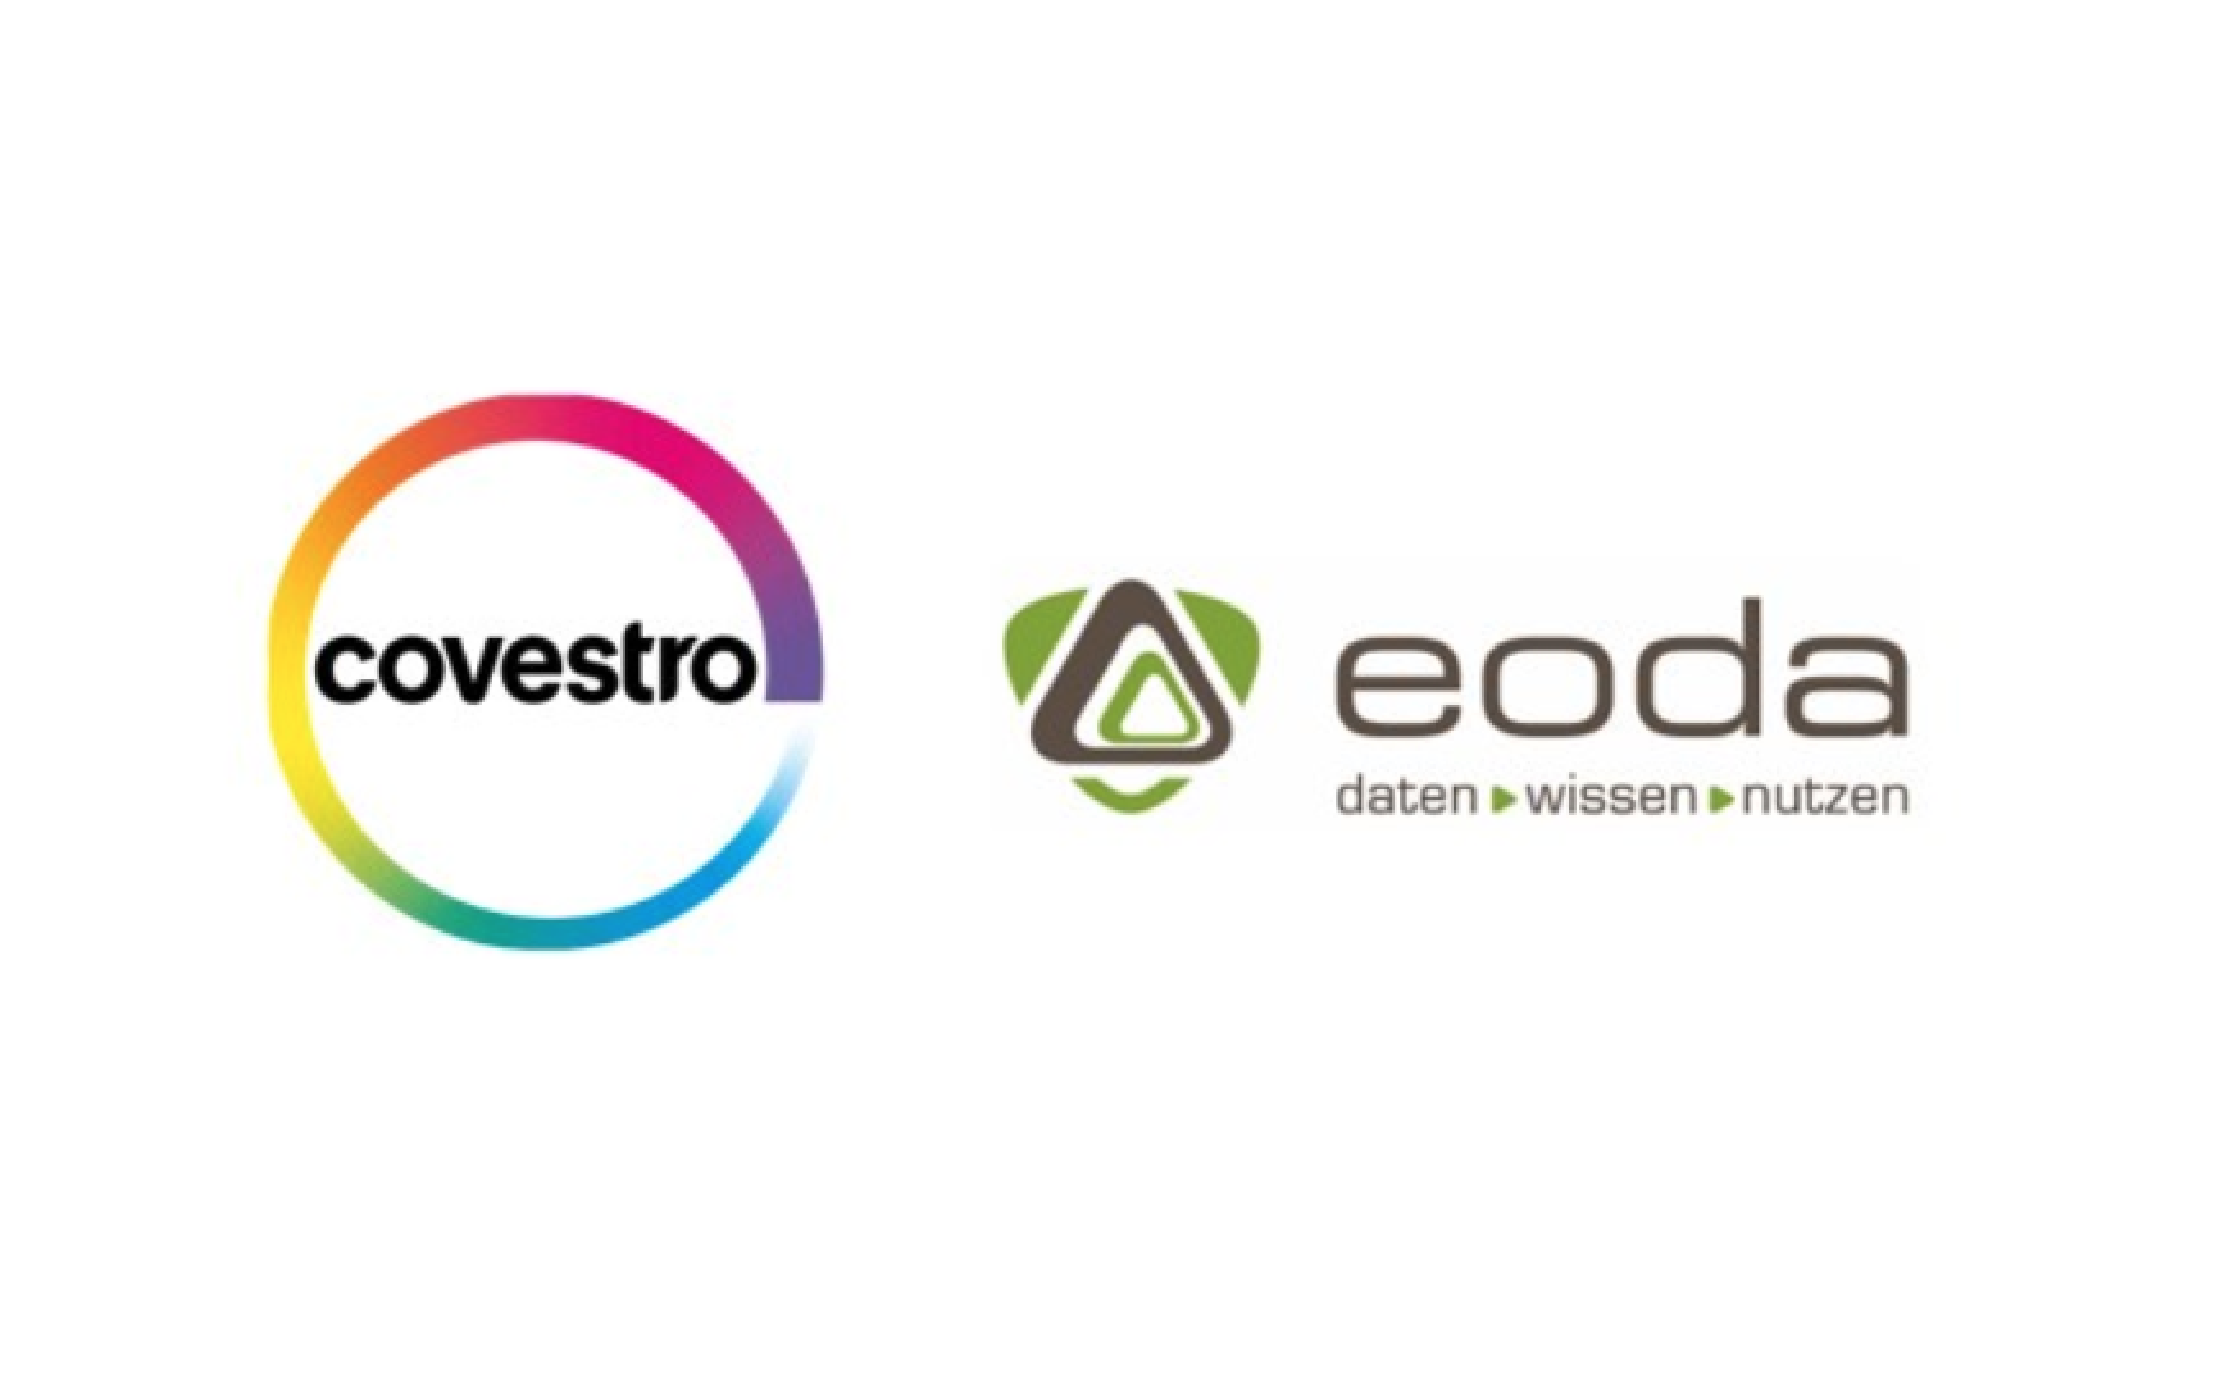 Thumbnail the logos of Covestro and eoda